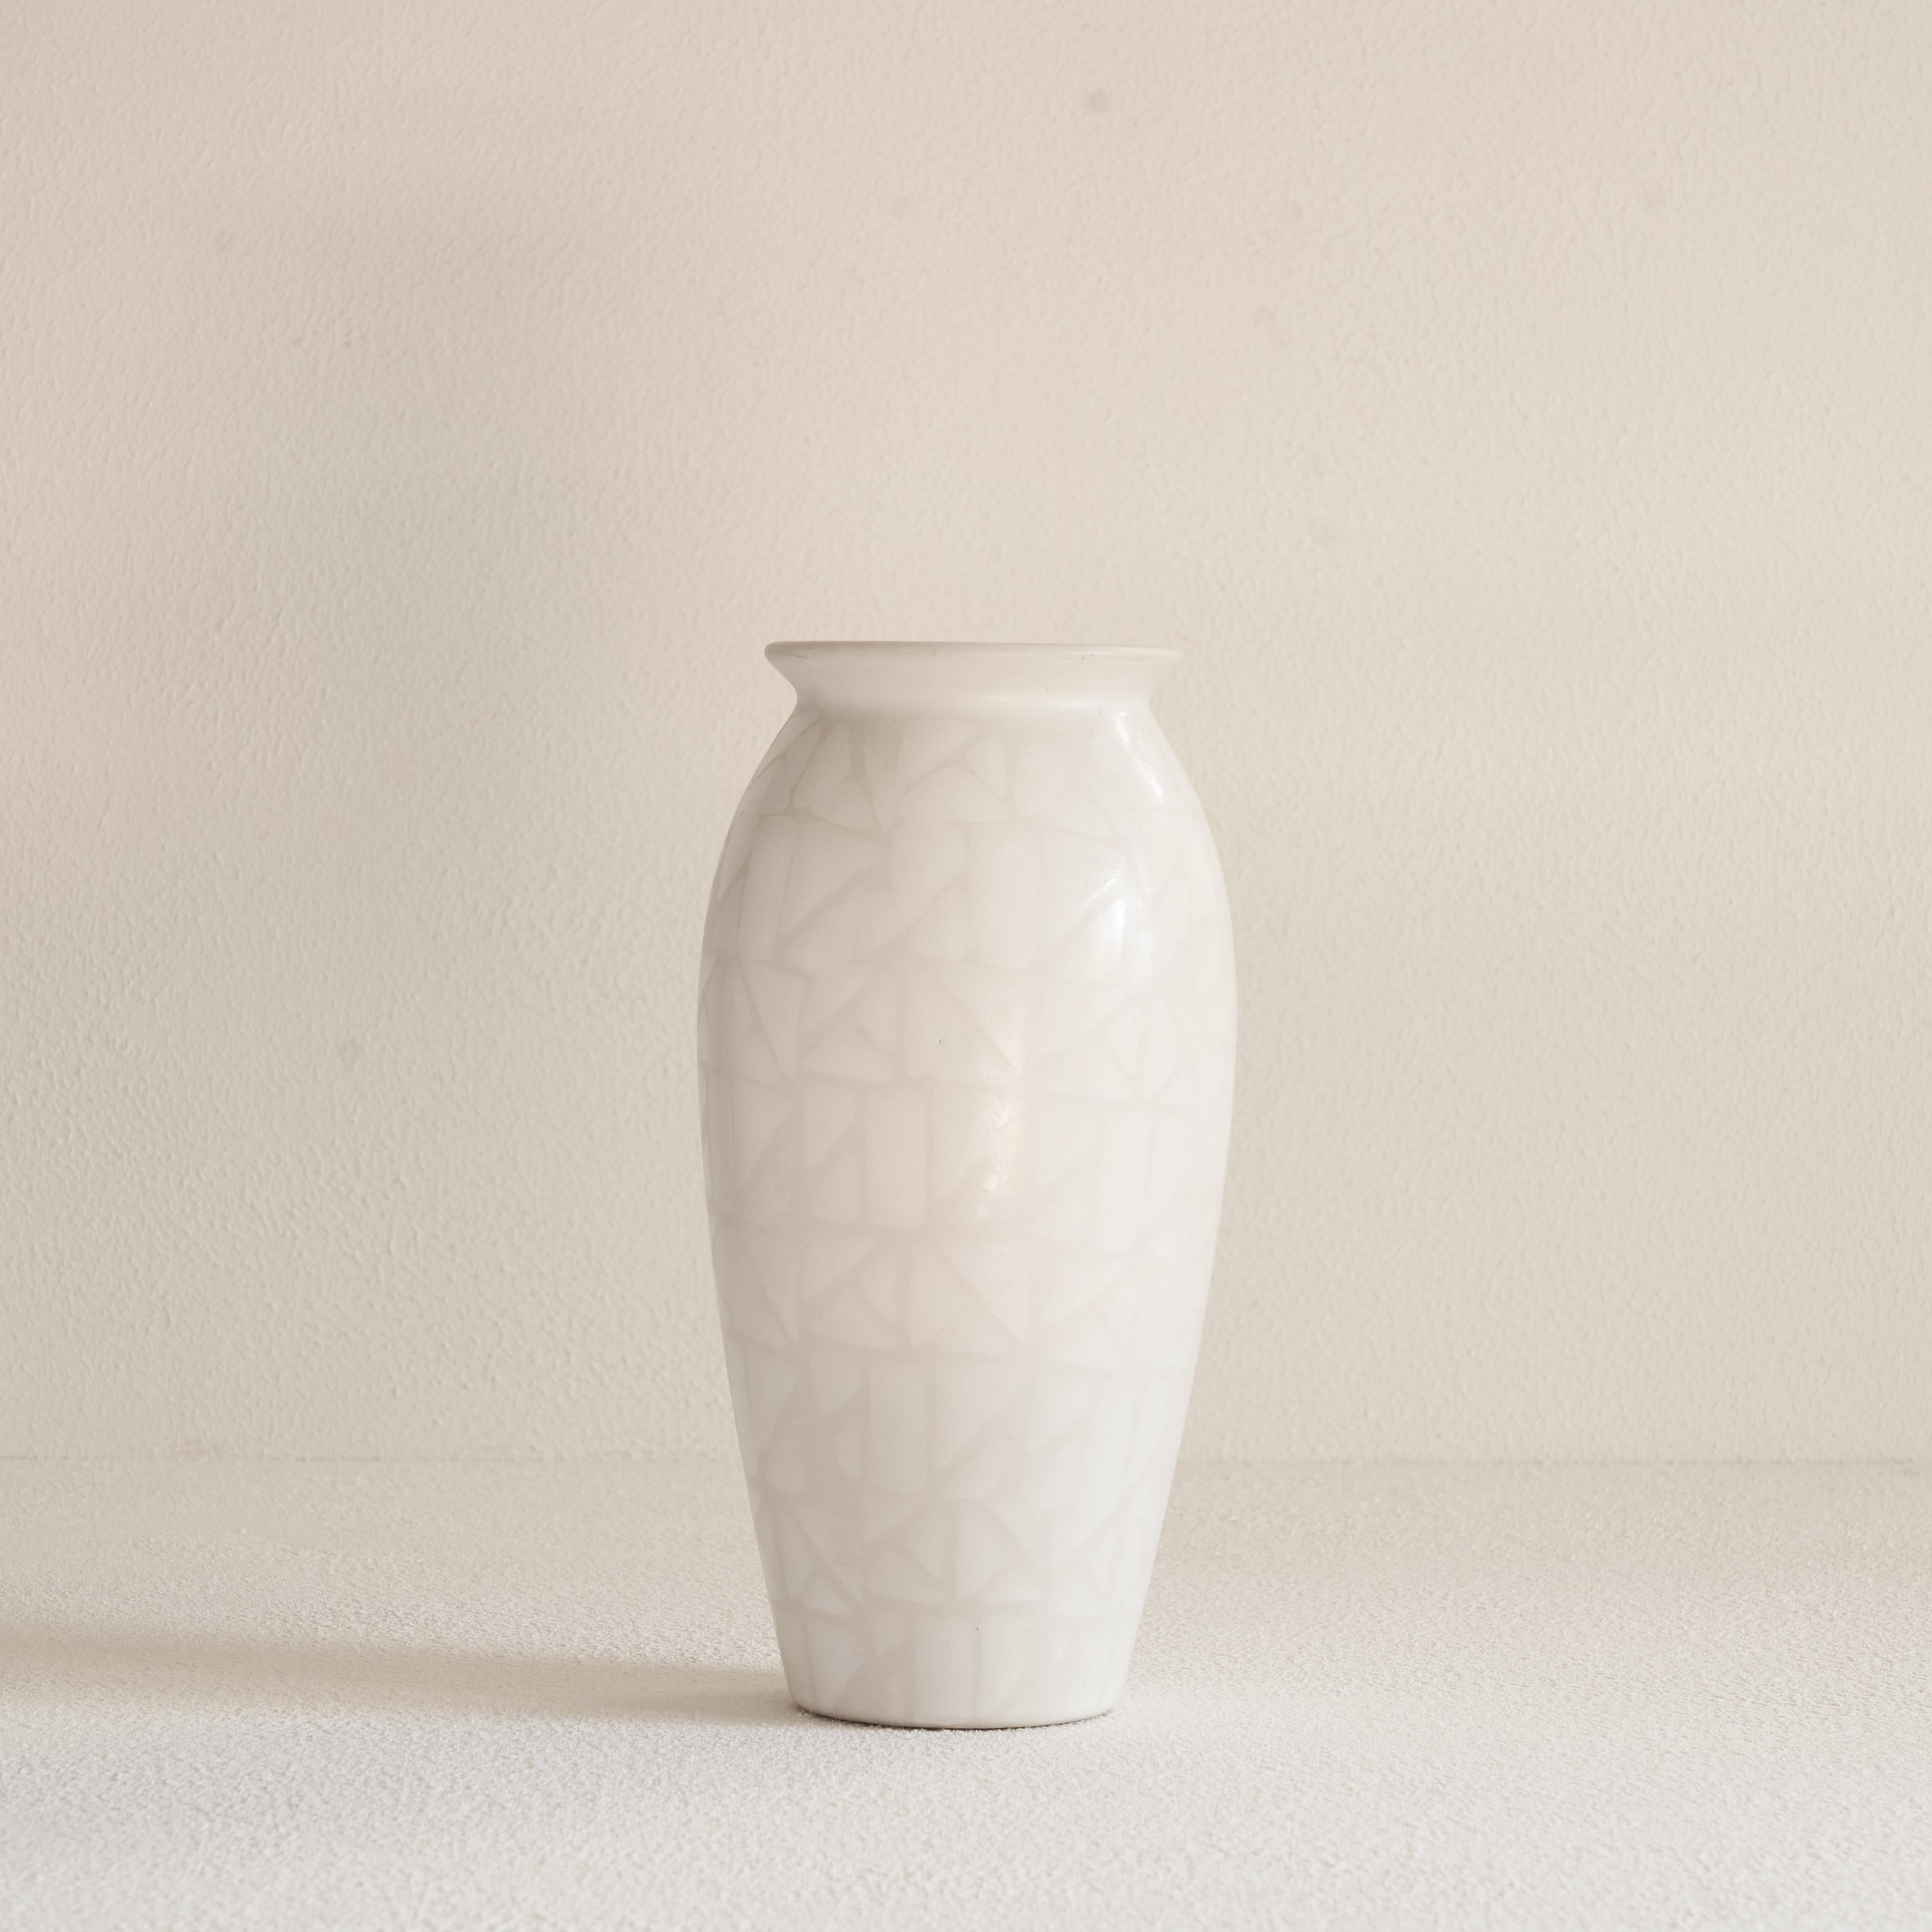 Geometrically Decorated midcentury Studio pottery vase, Germany, 1970s.

Wonderful vase in off-white with a distinct geometrical decor in matte and shiny glaze. A timeless base shape combined with the elegant decor and the off-white color make for